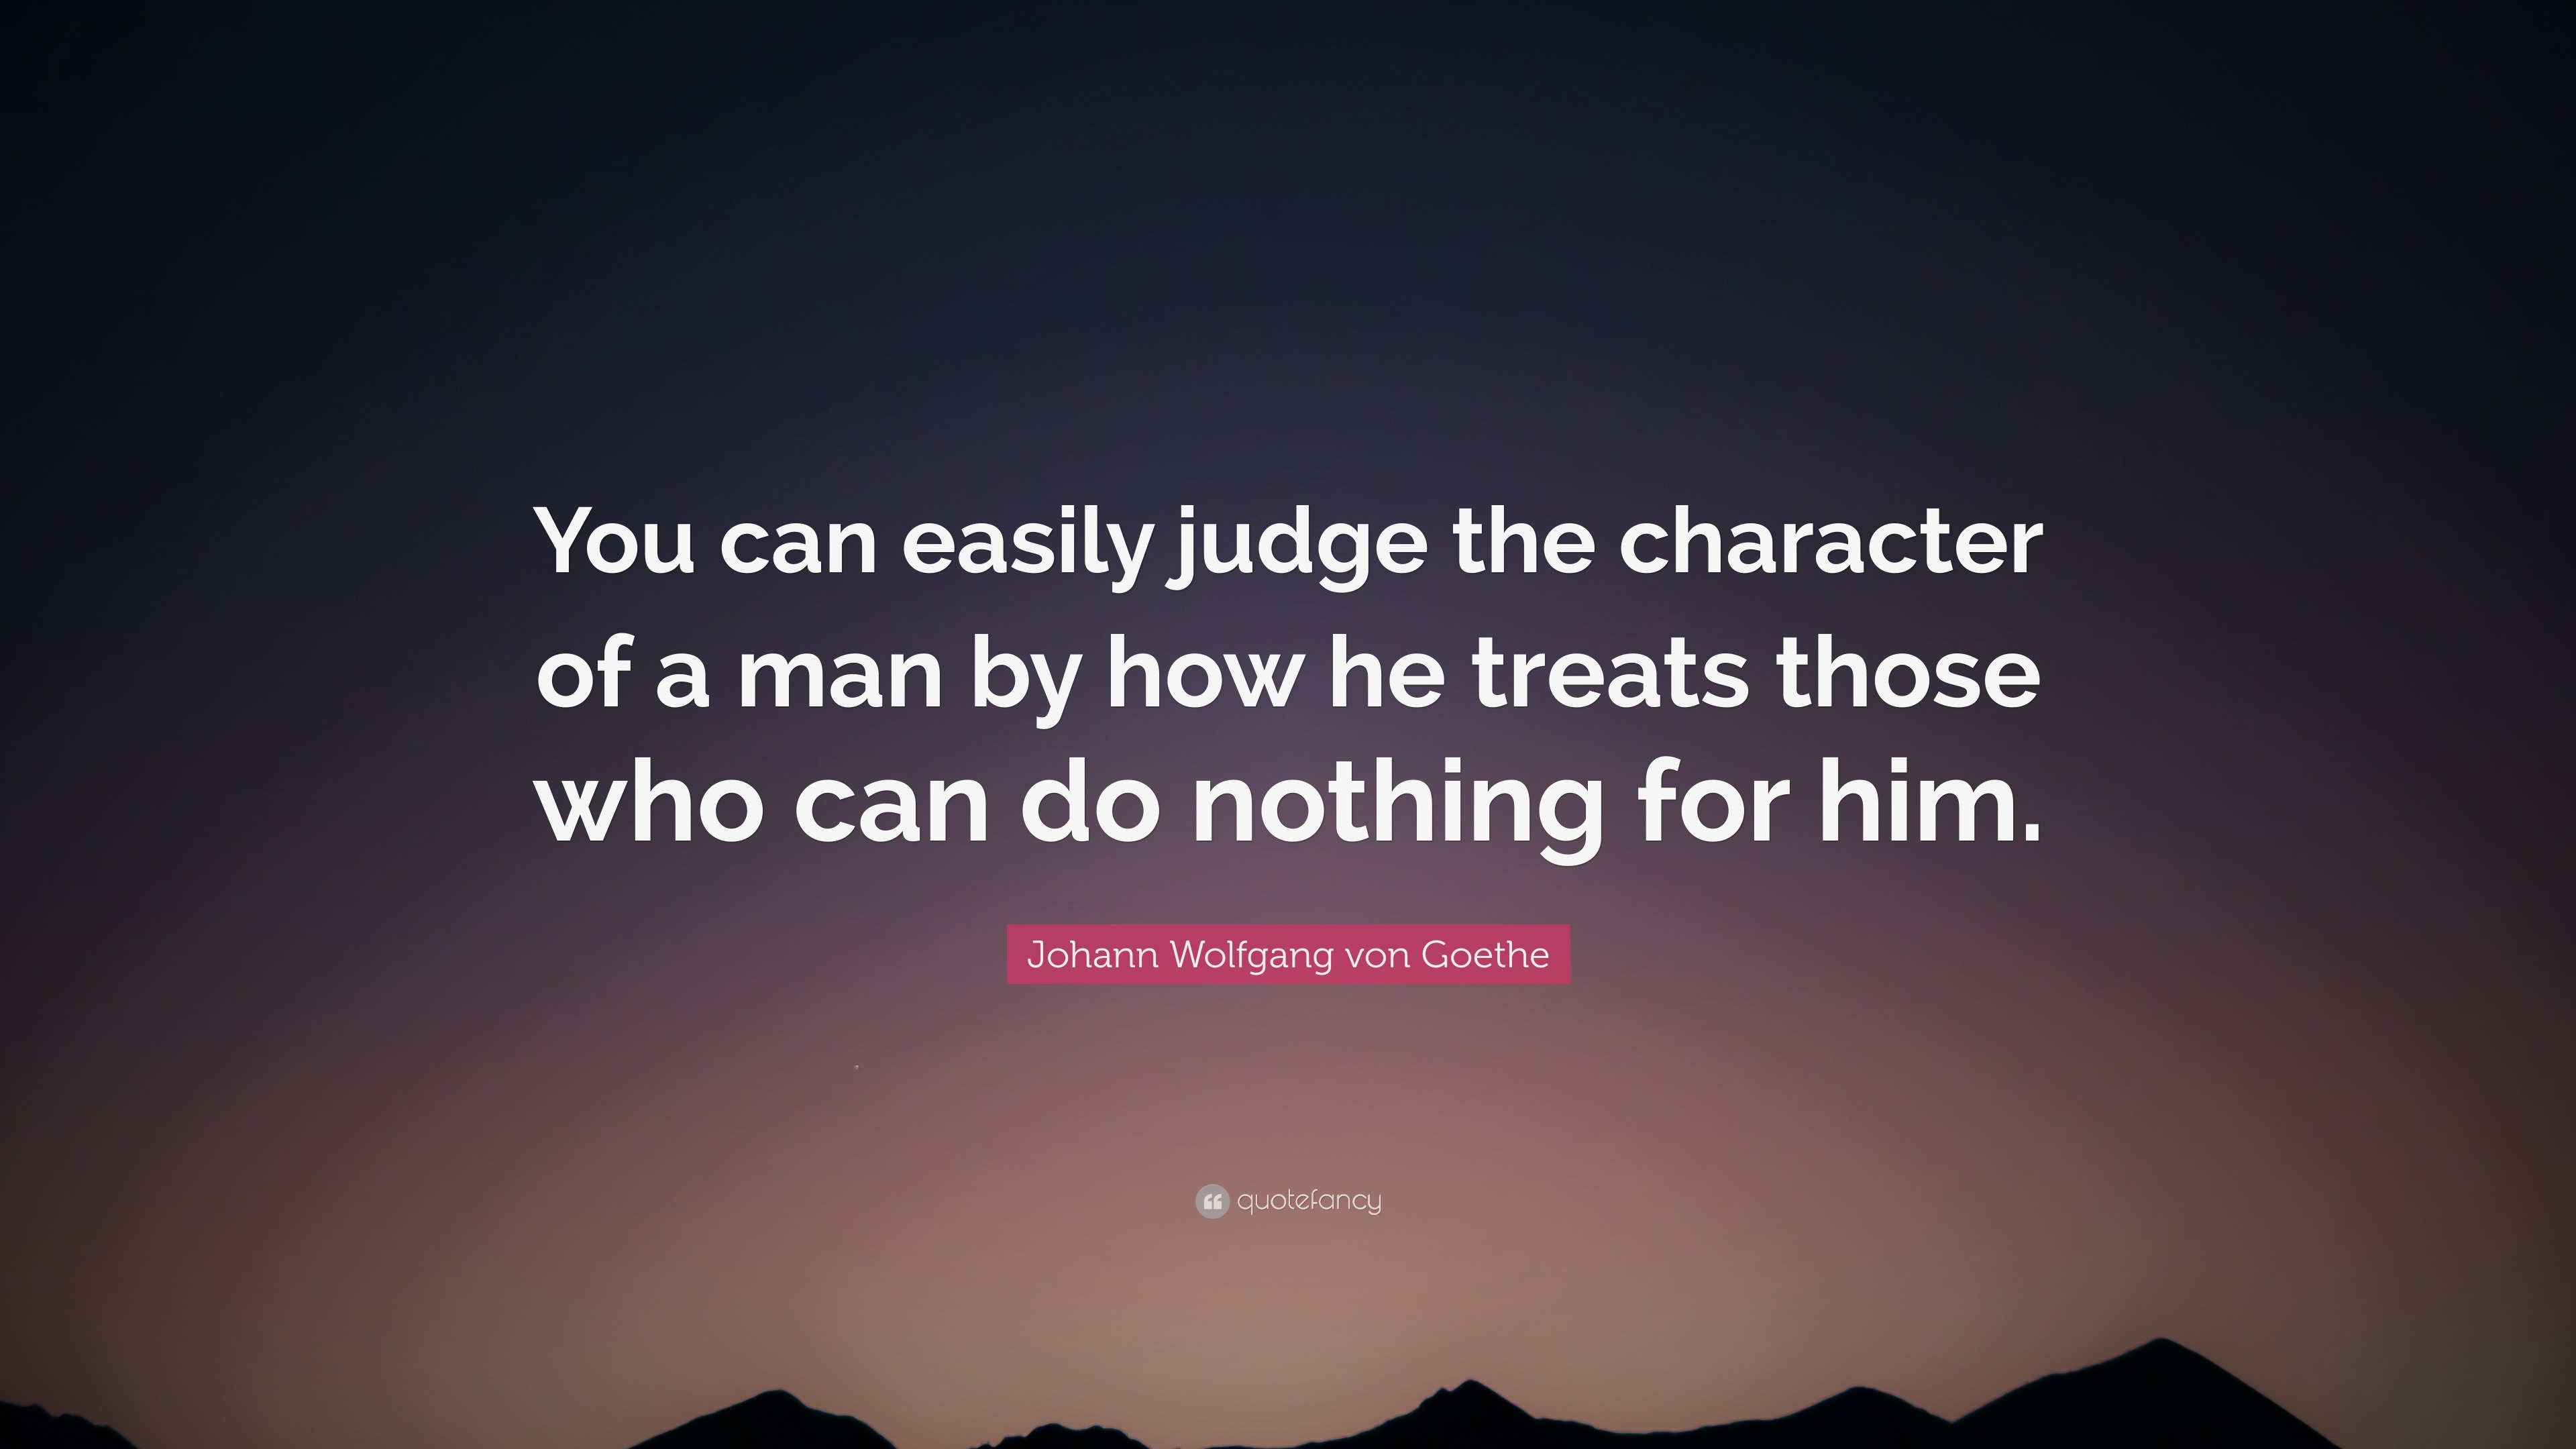 1727568-Johann-Wolfgang-von-Goethe-Quote-You-can-easily-judge-the.jpg